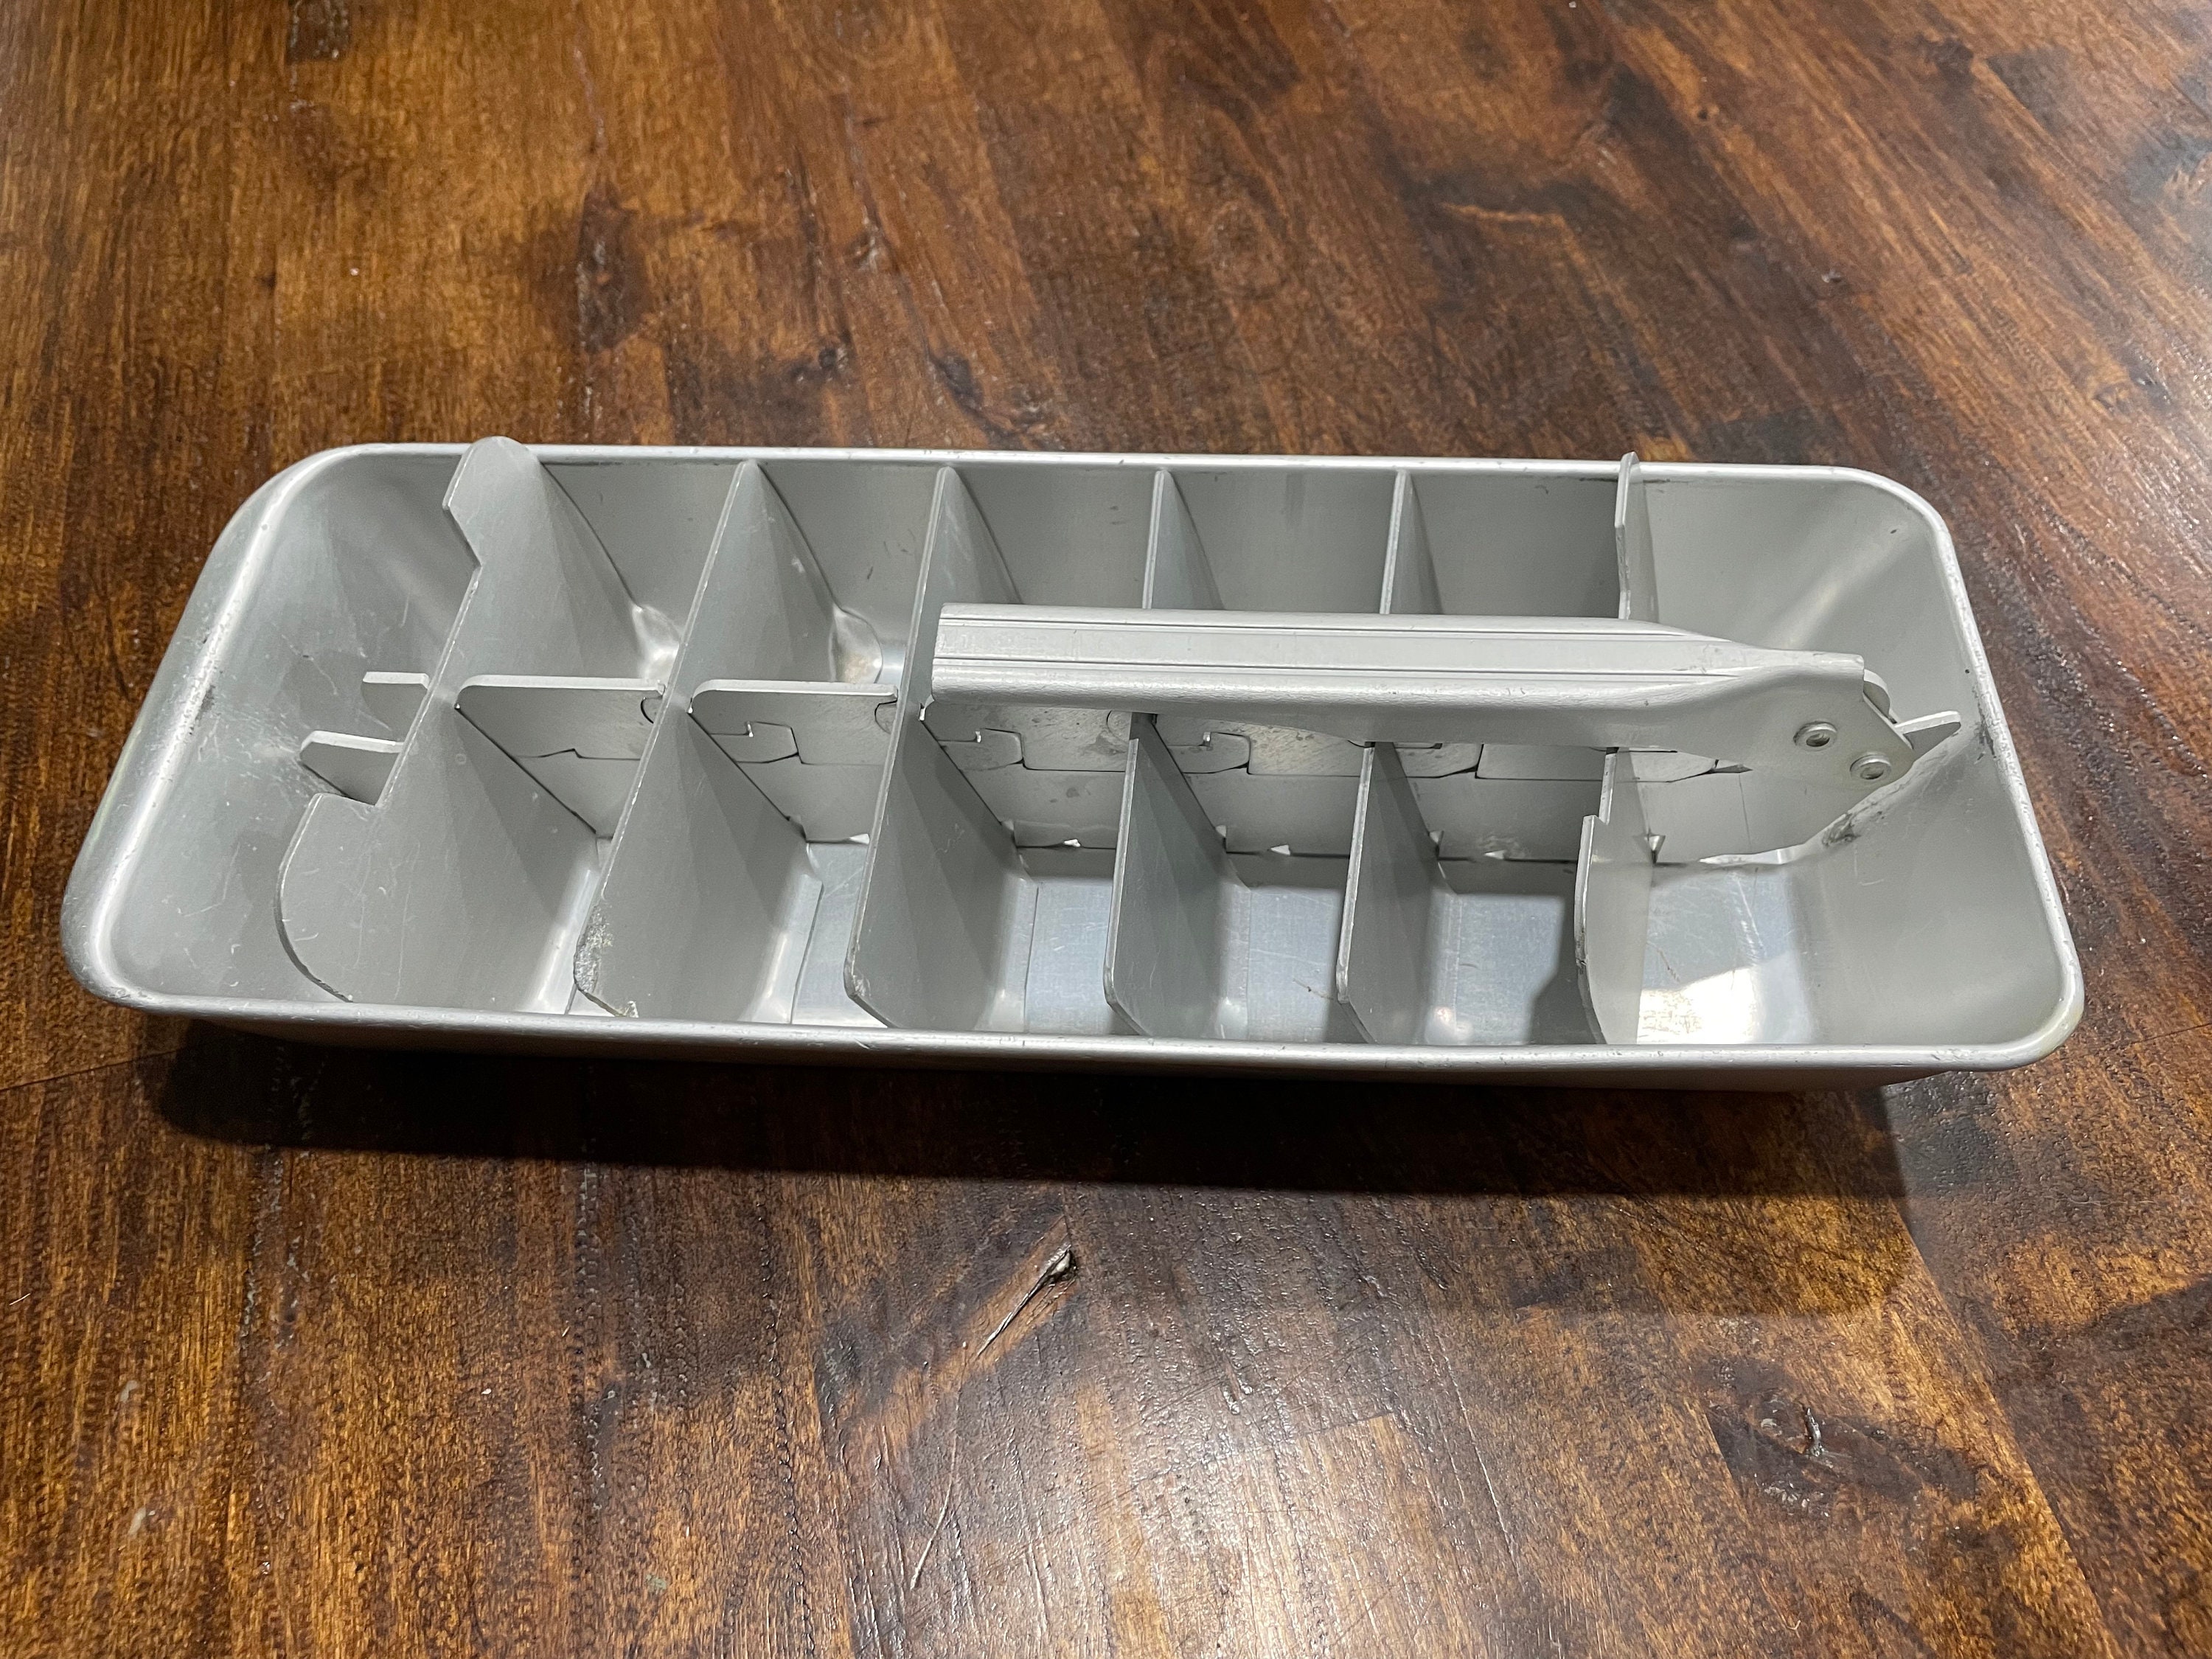 Vintage Set of 3 unbranded Old fashioned ice cube trays about 1950's